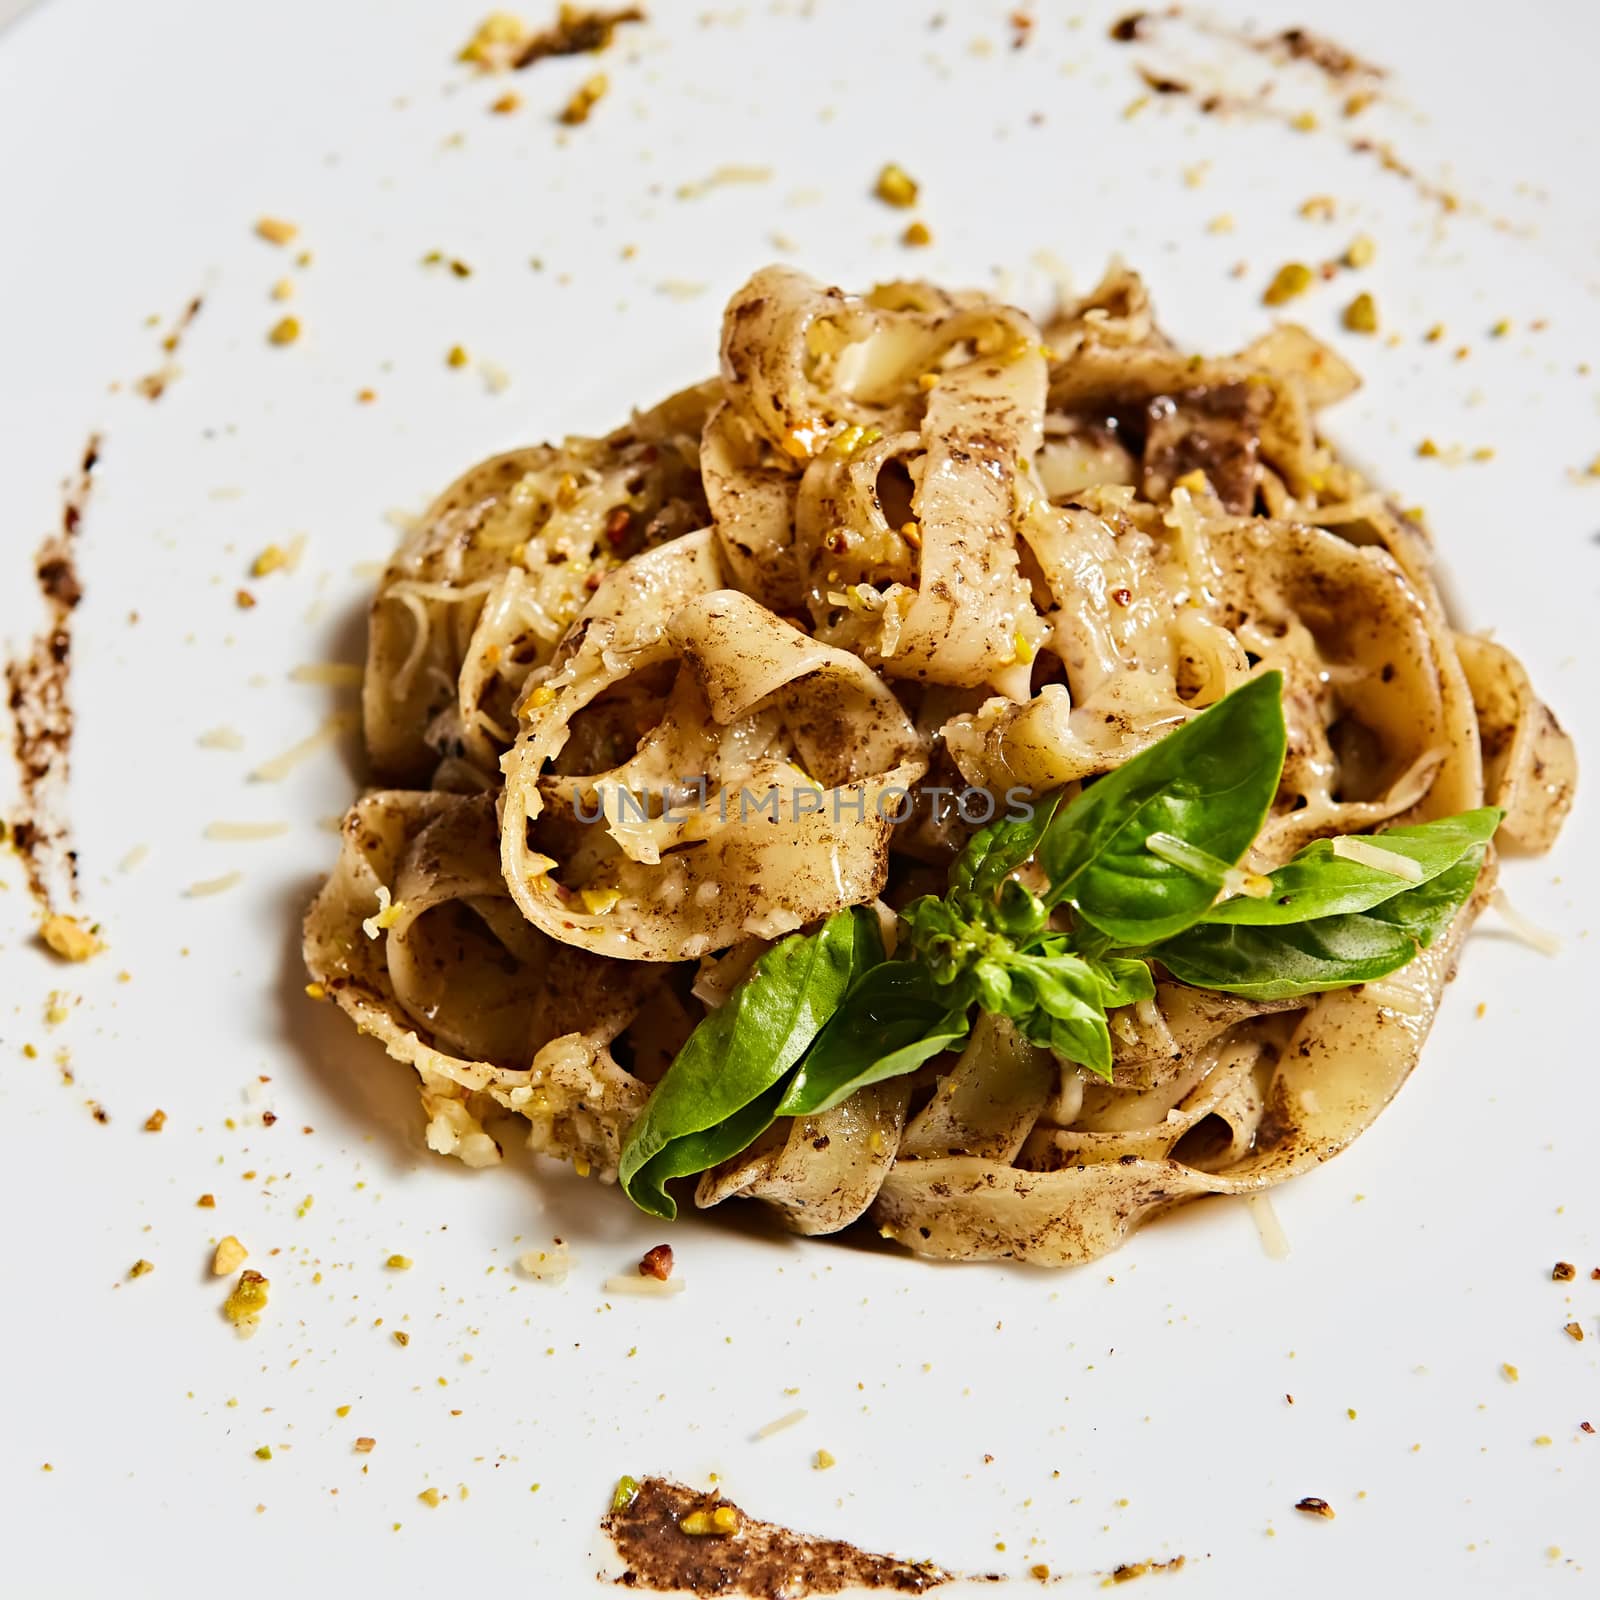 Tagliatelle with mushrooms and decorated with basil leaves